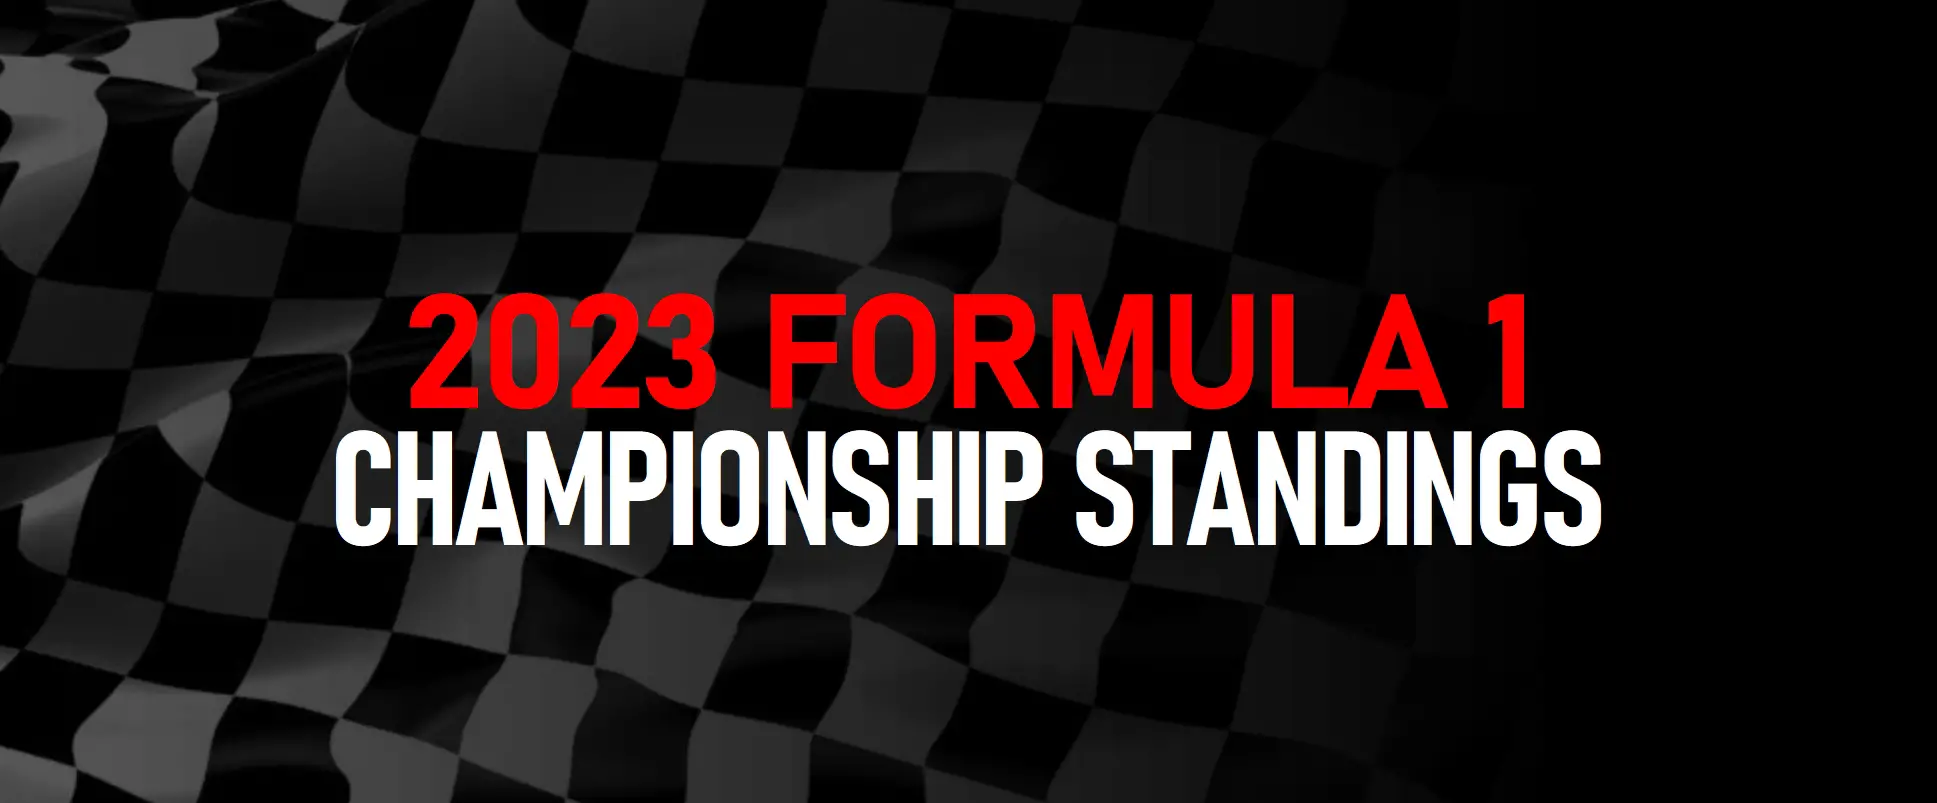 2023 F1 Championship Standings Lights Out